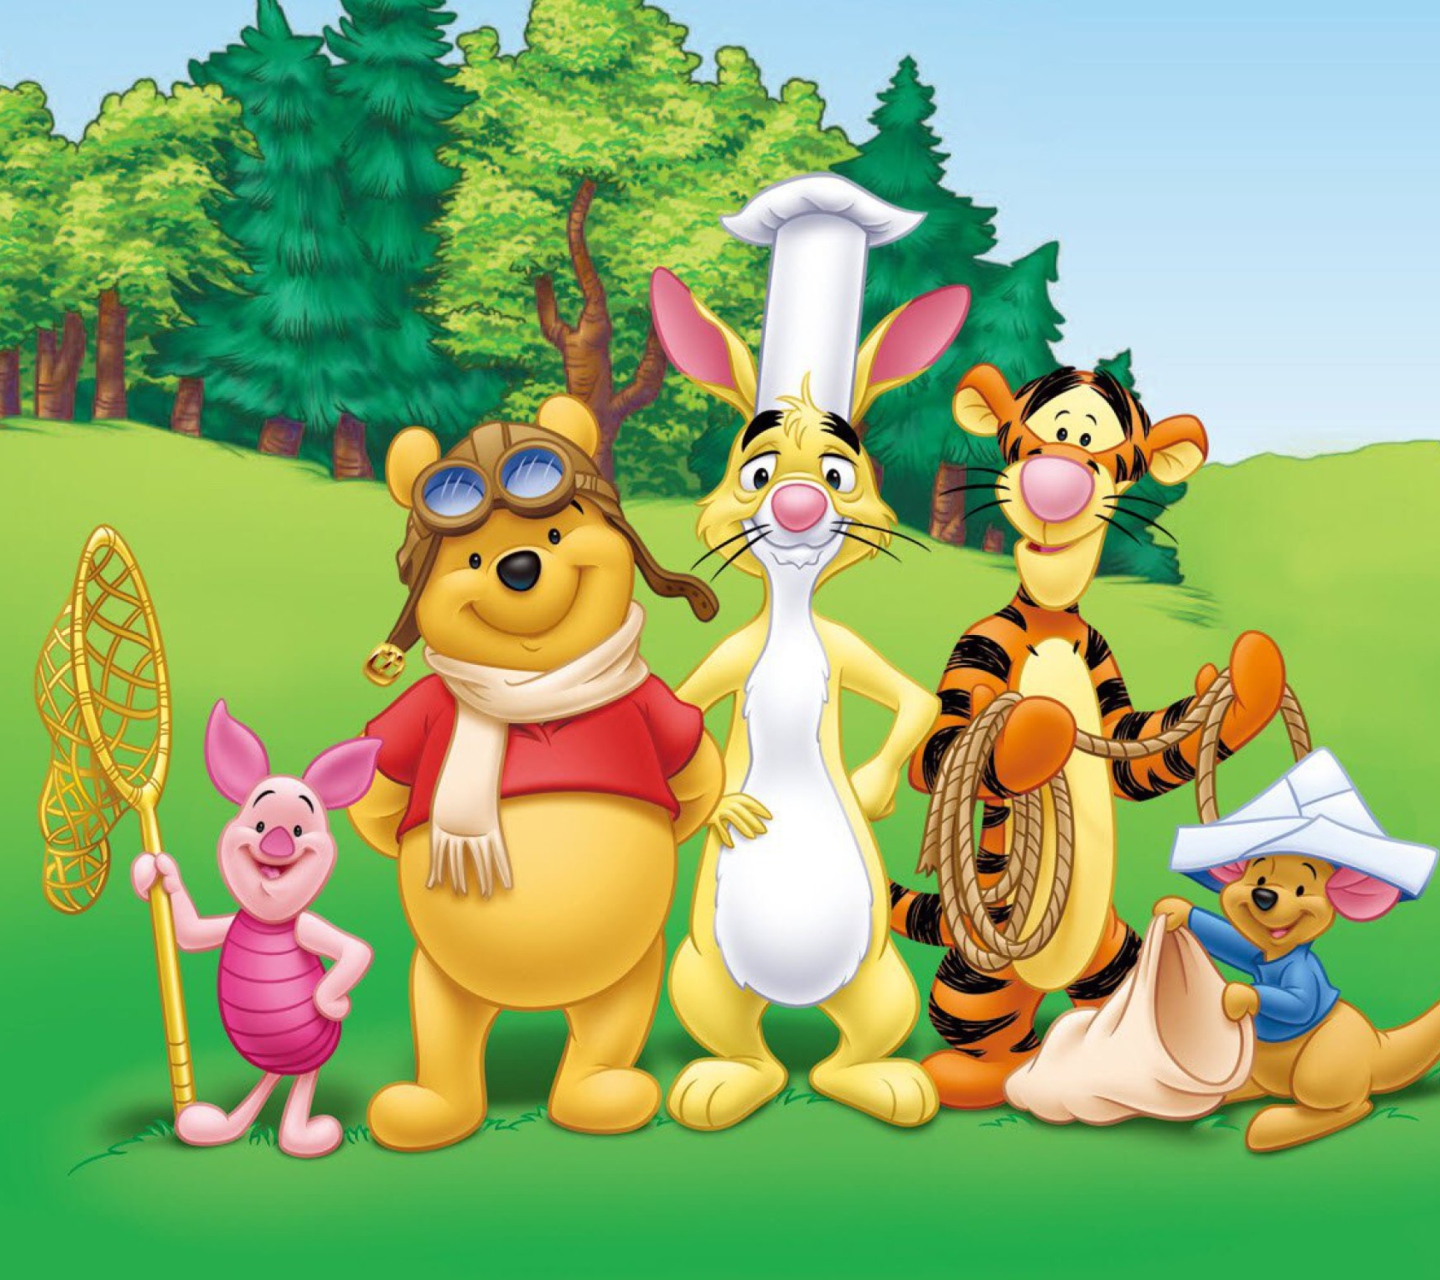 Pooh and Friends wallpaper 1440x1280